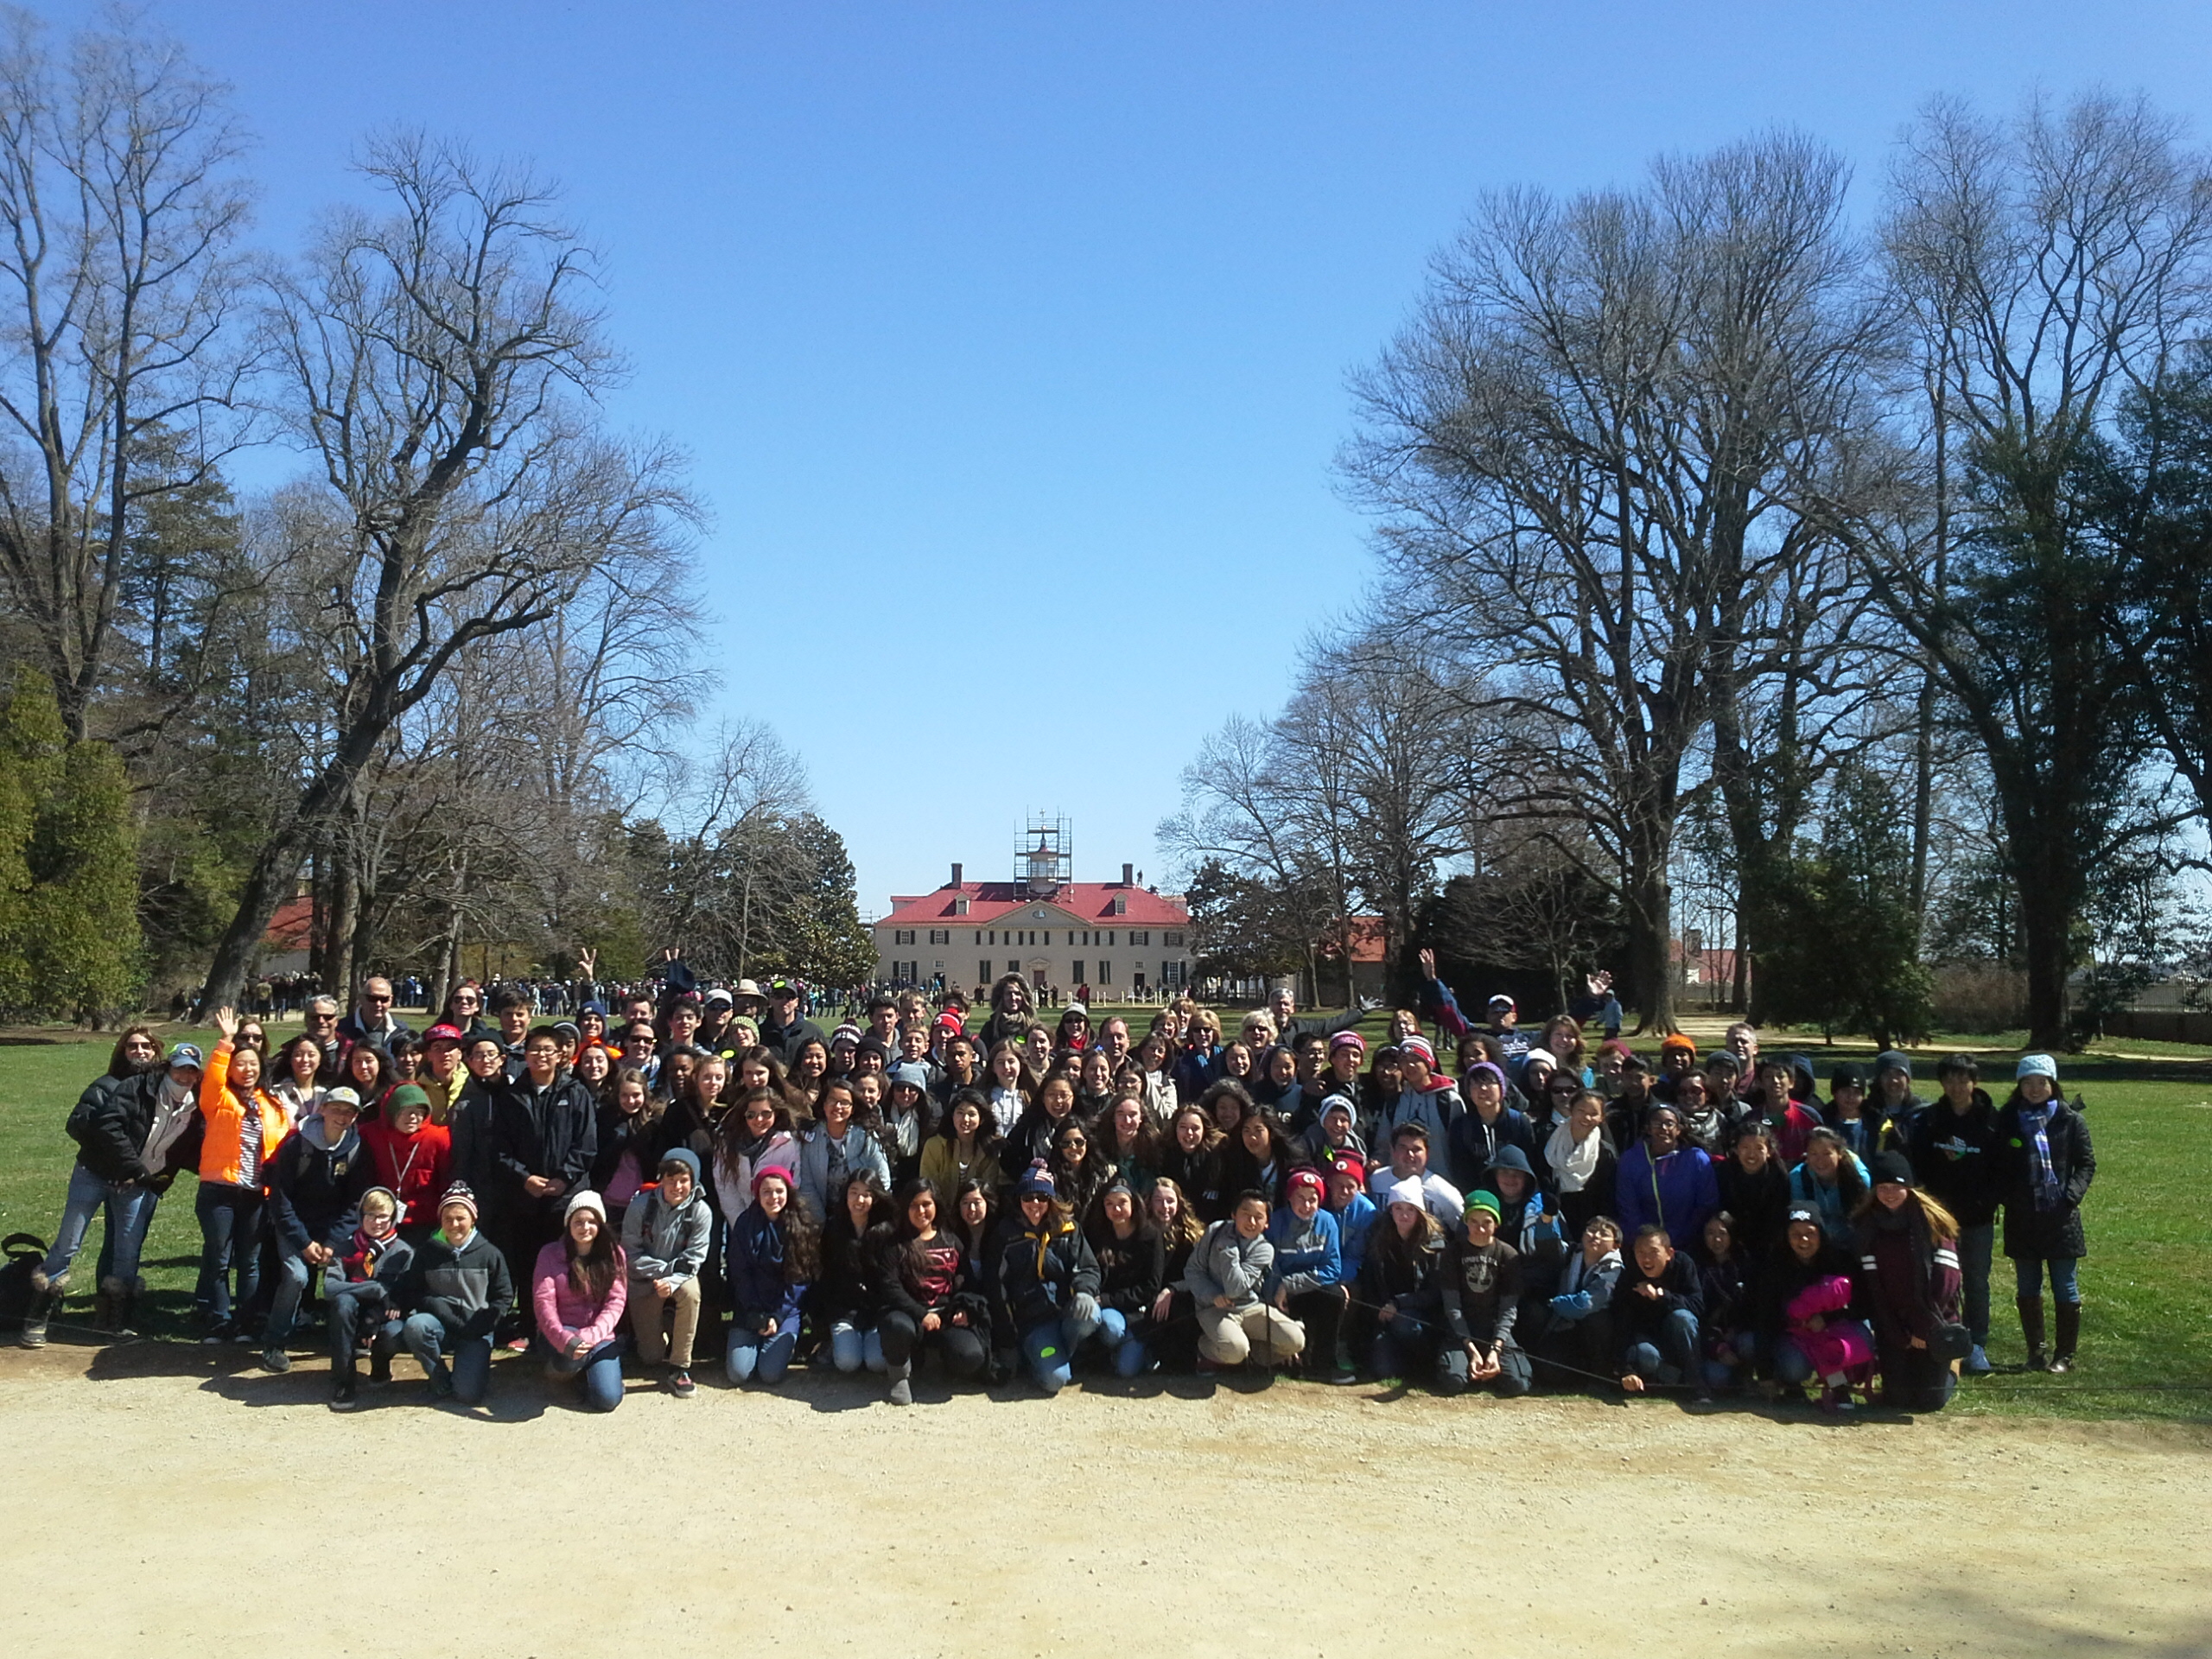 Group of students posing for photo in front of historical Mt Vernon house